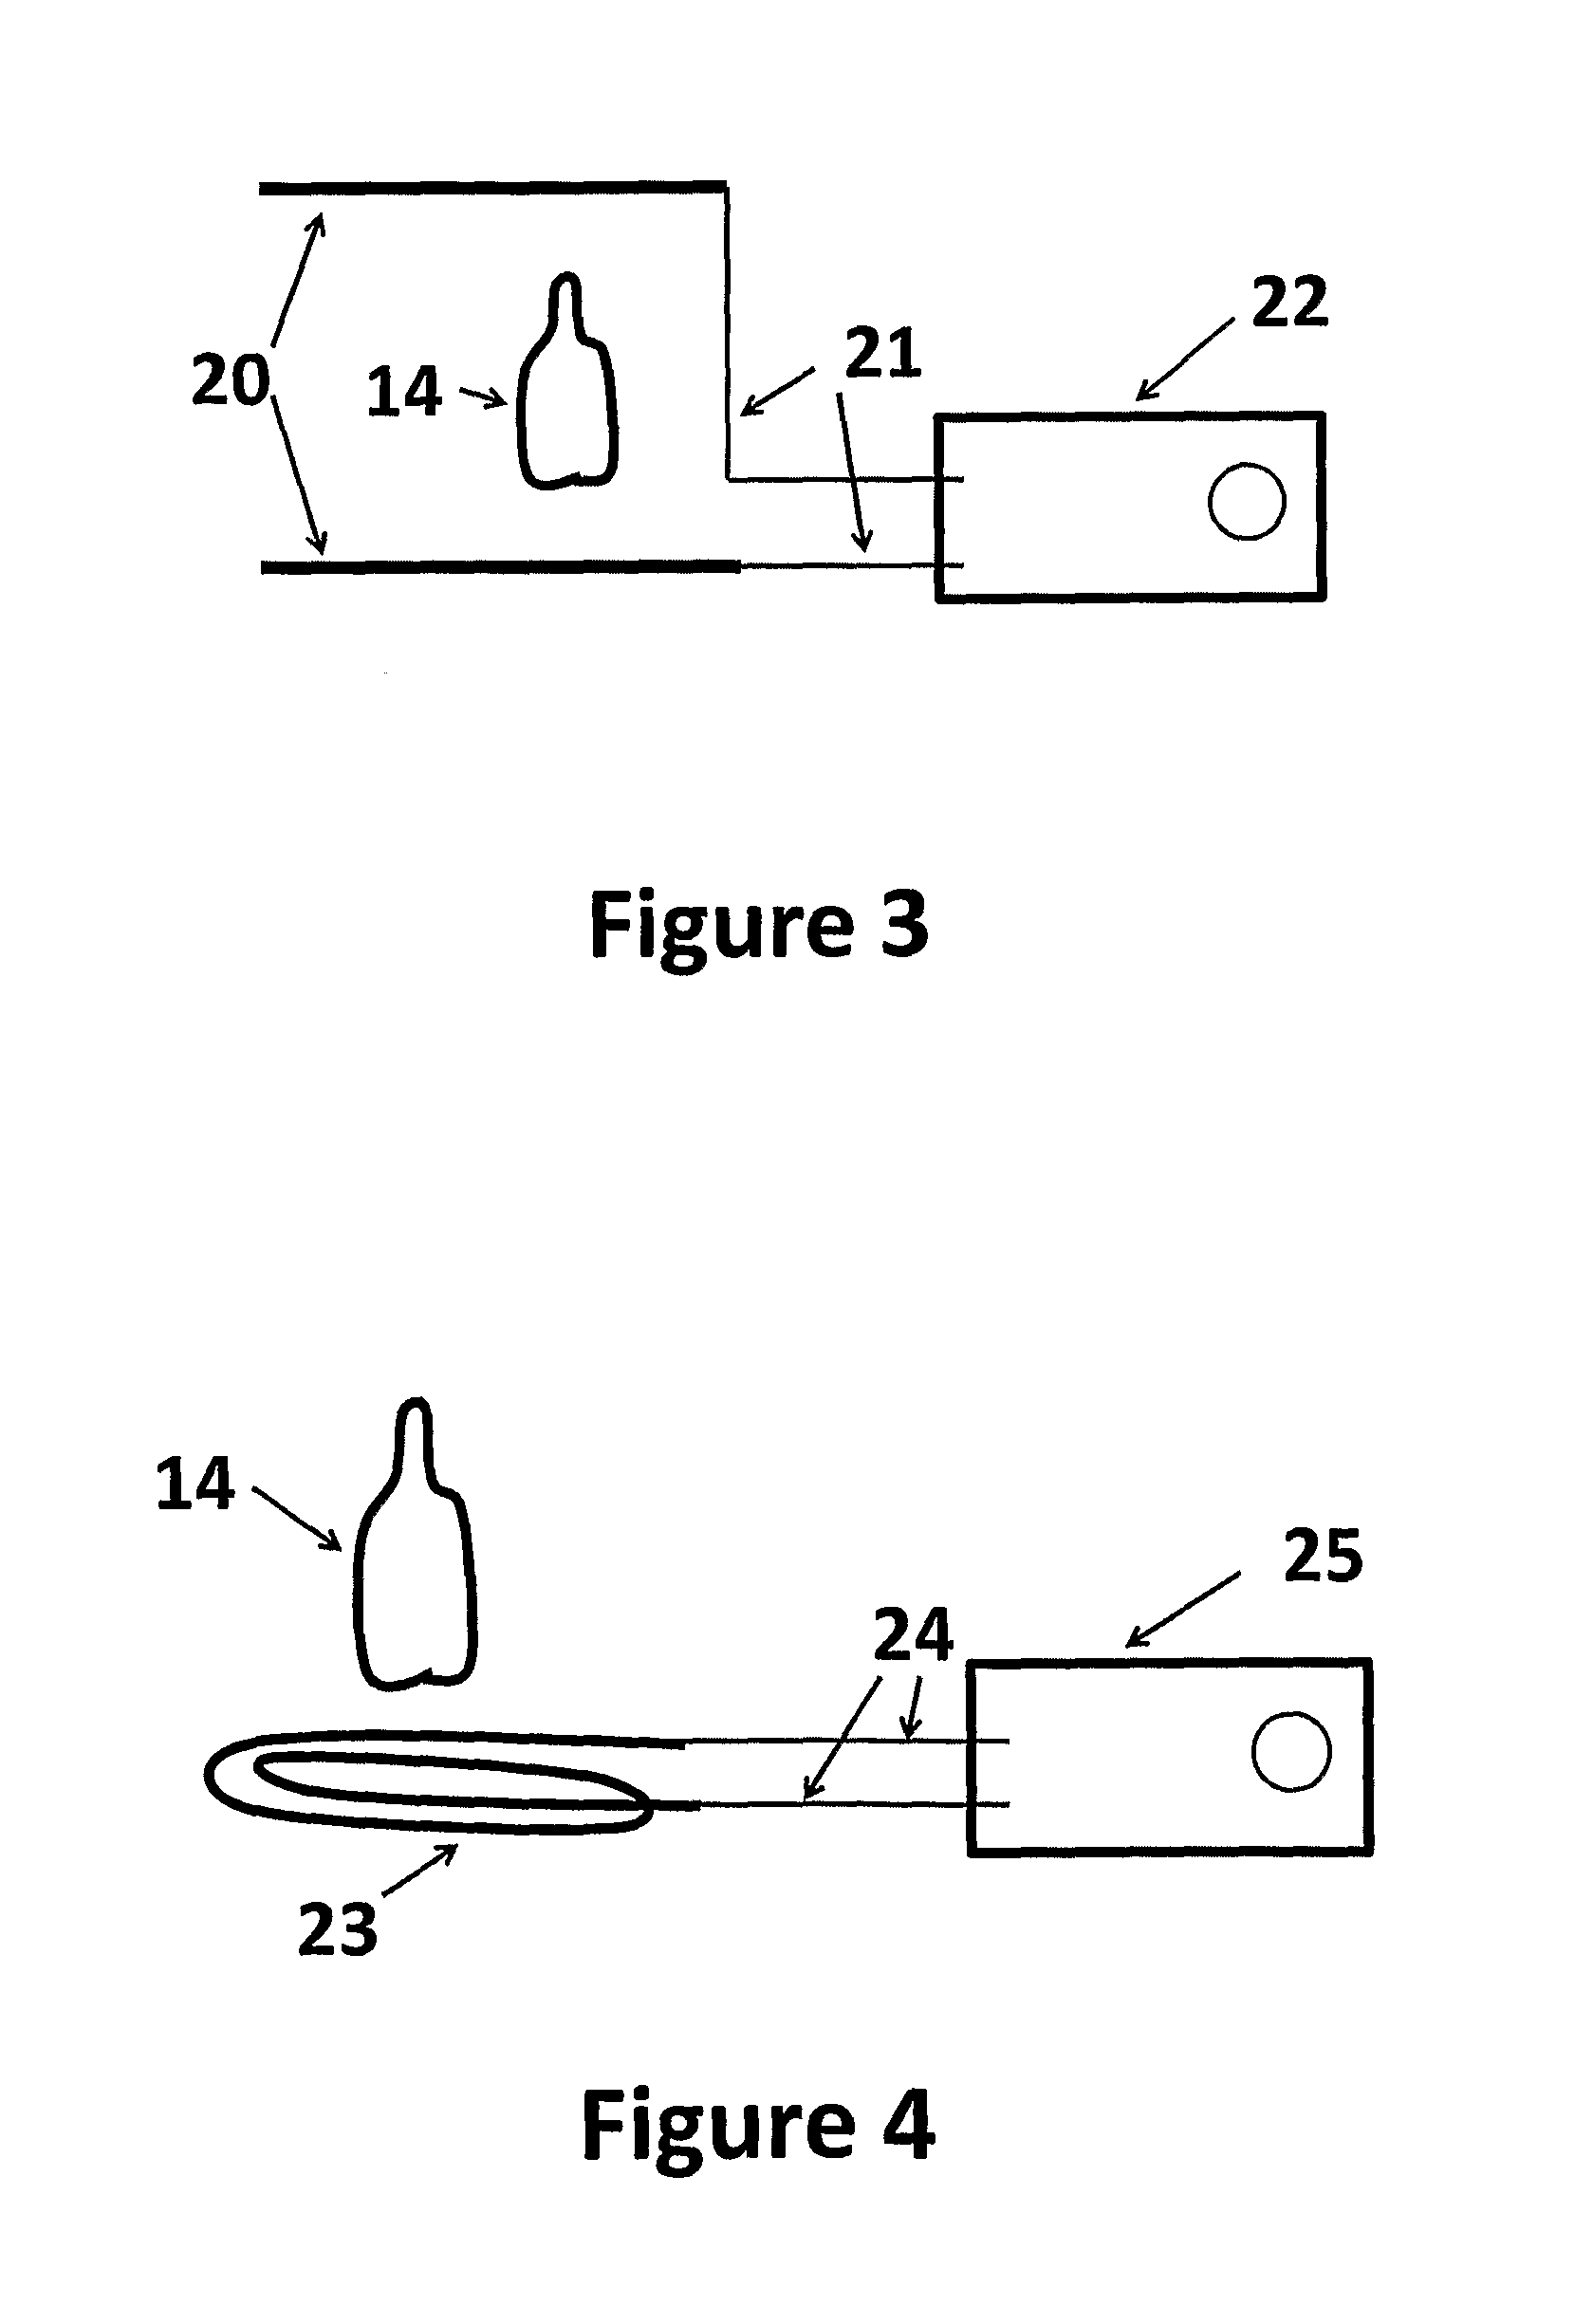 Methods and apparatus to create resonance in water and to destroy resonance in bacteria